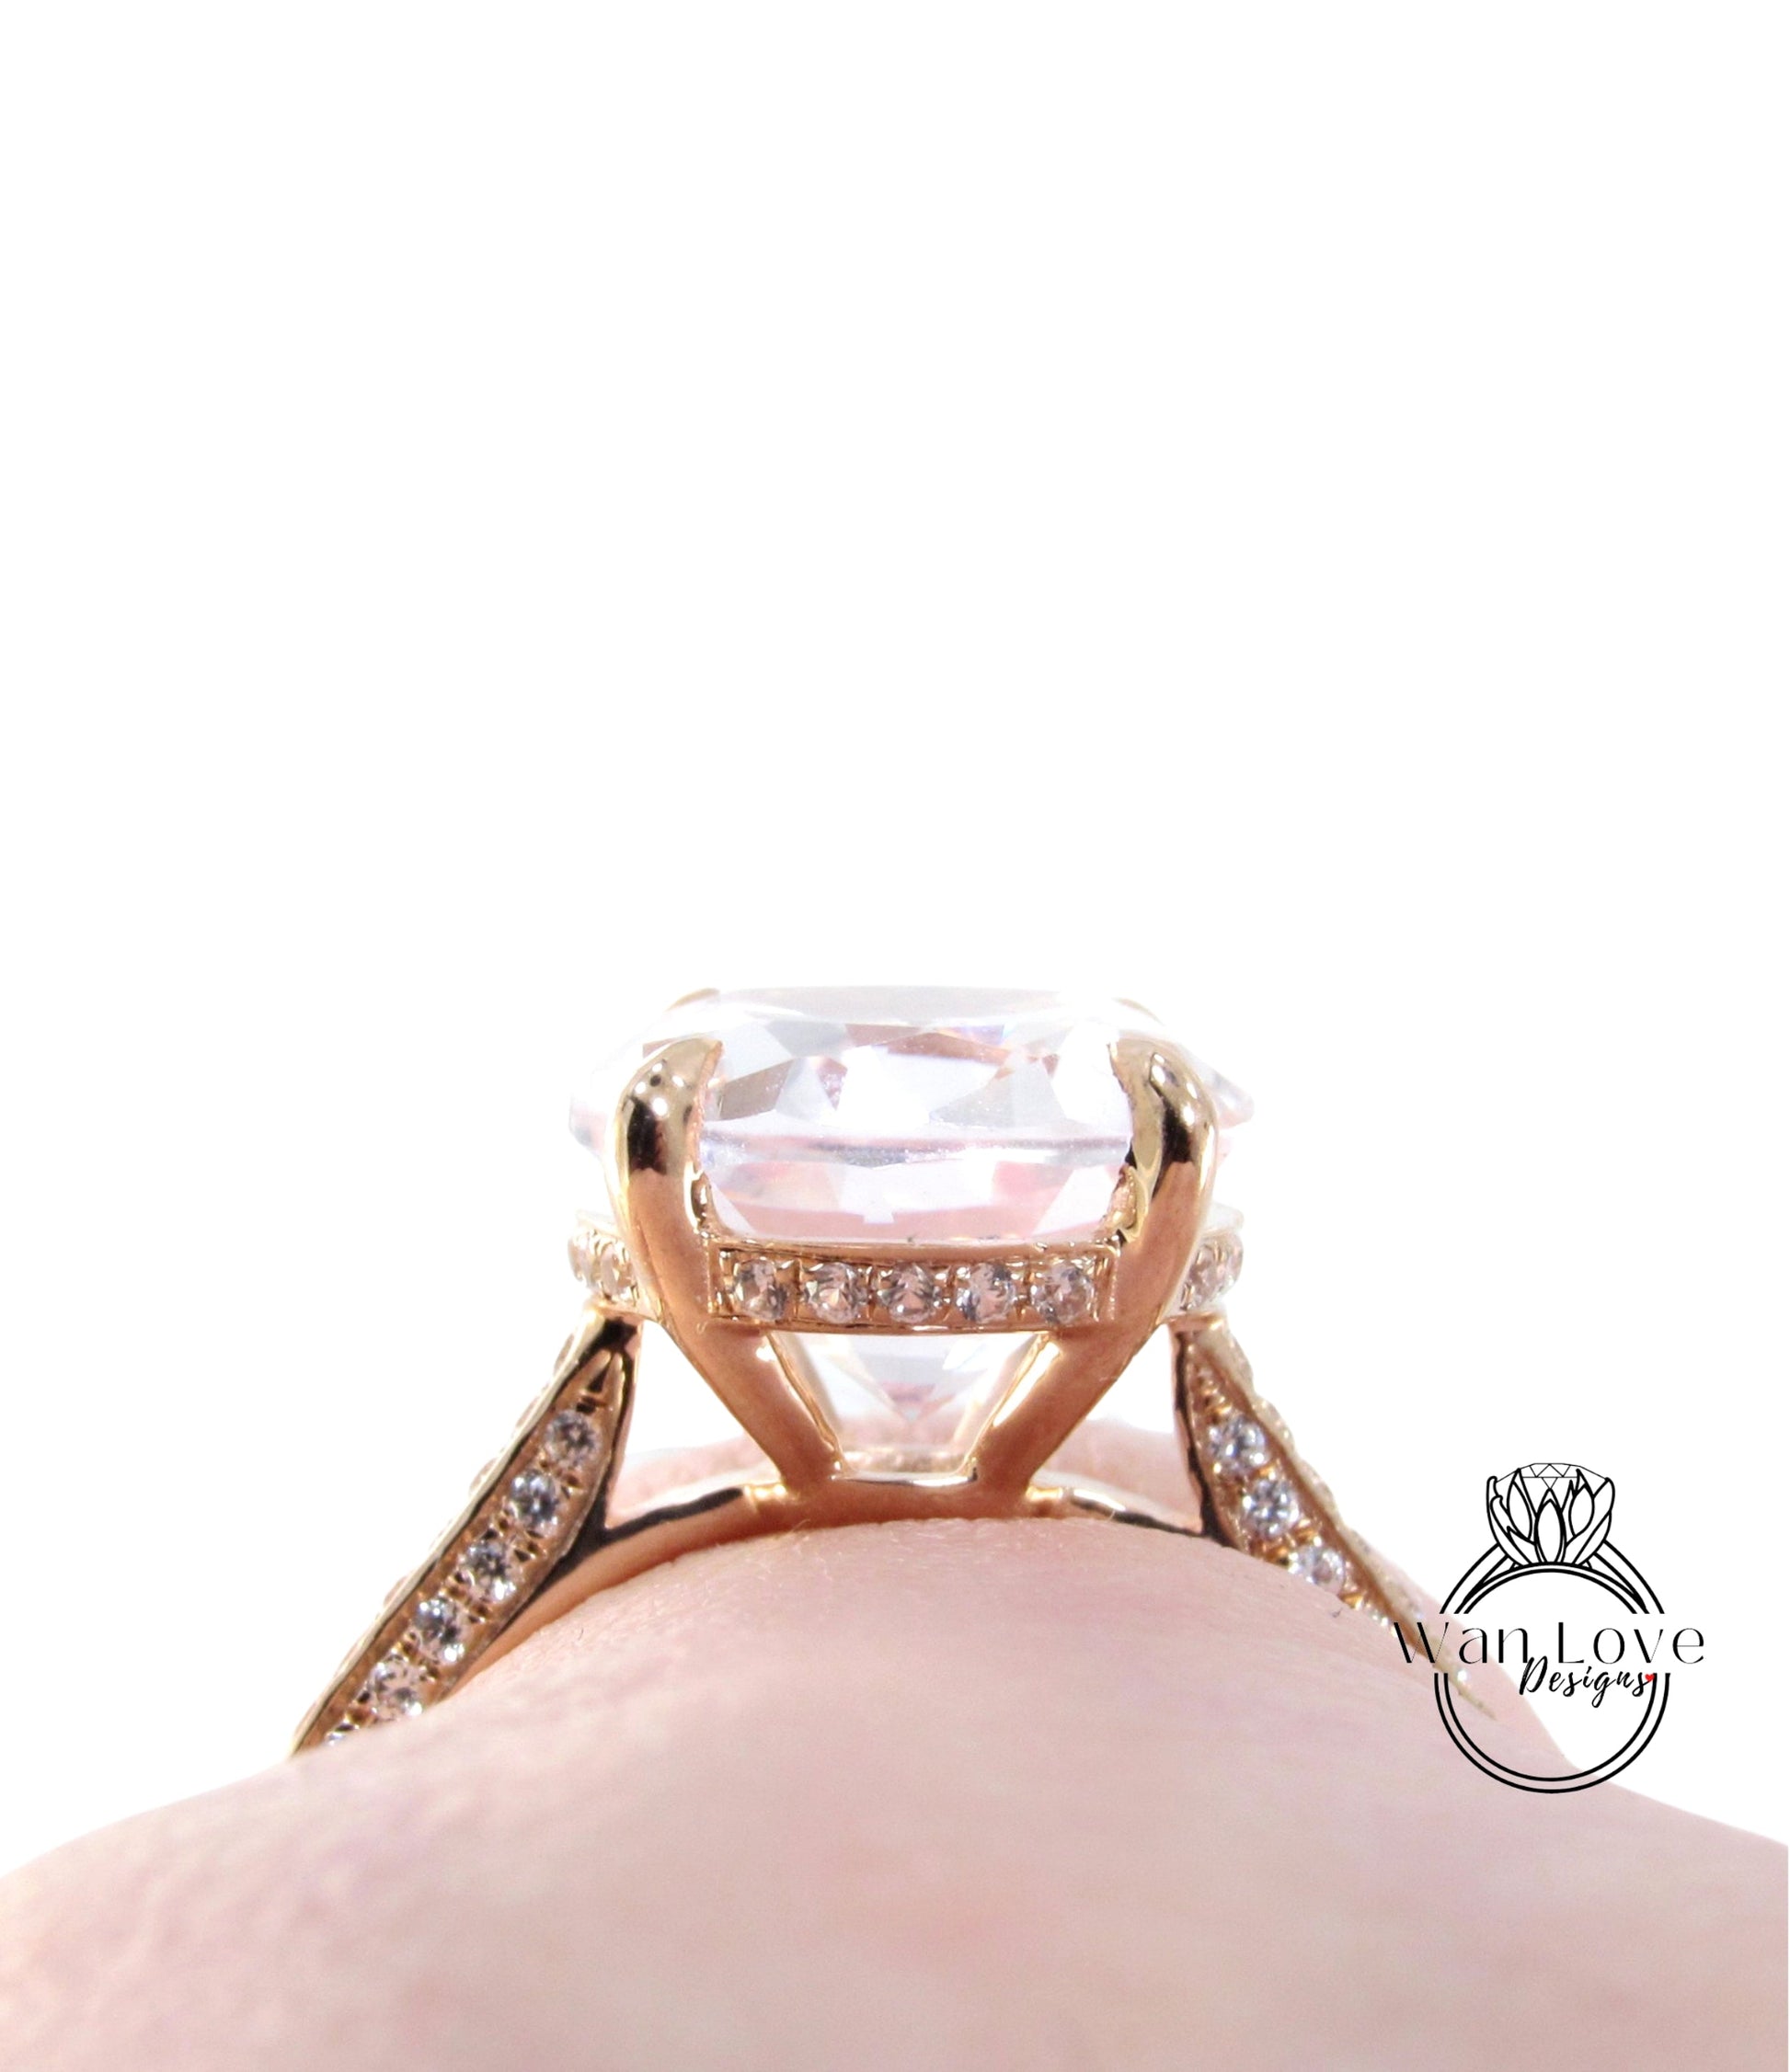 Custom Listing for Justin Celebrity style engagement ring Oval Light Pink Sapphire diamond hidden halo rose gold almost eternity band bridal ring Anniversary gift Wan Love Designs